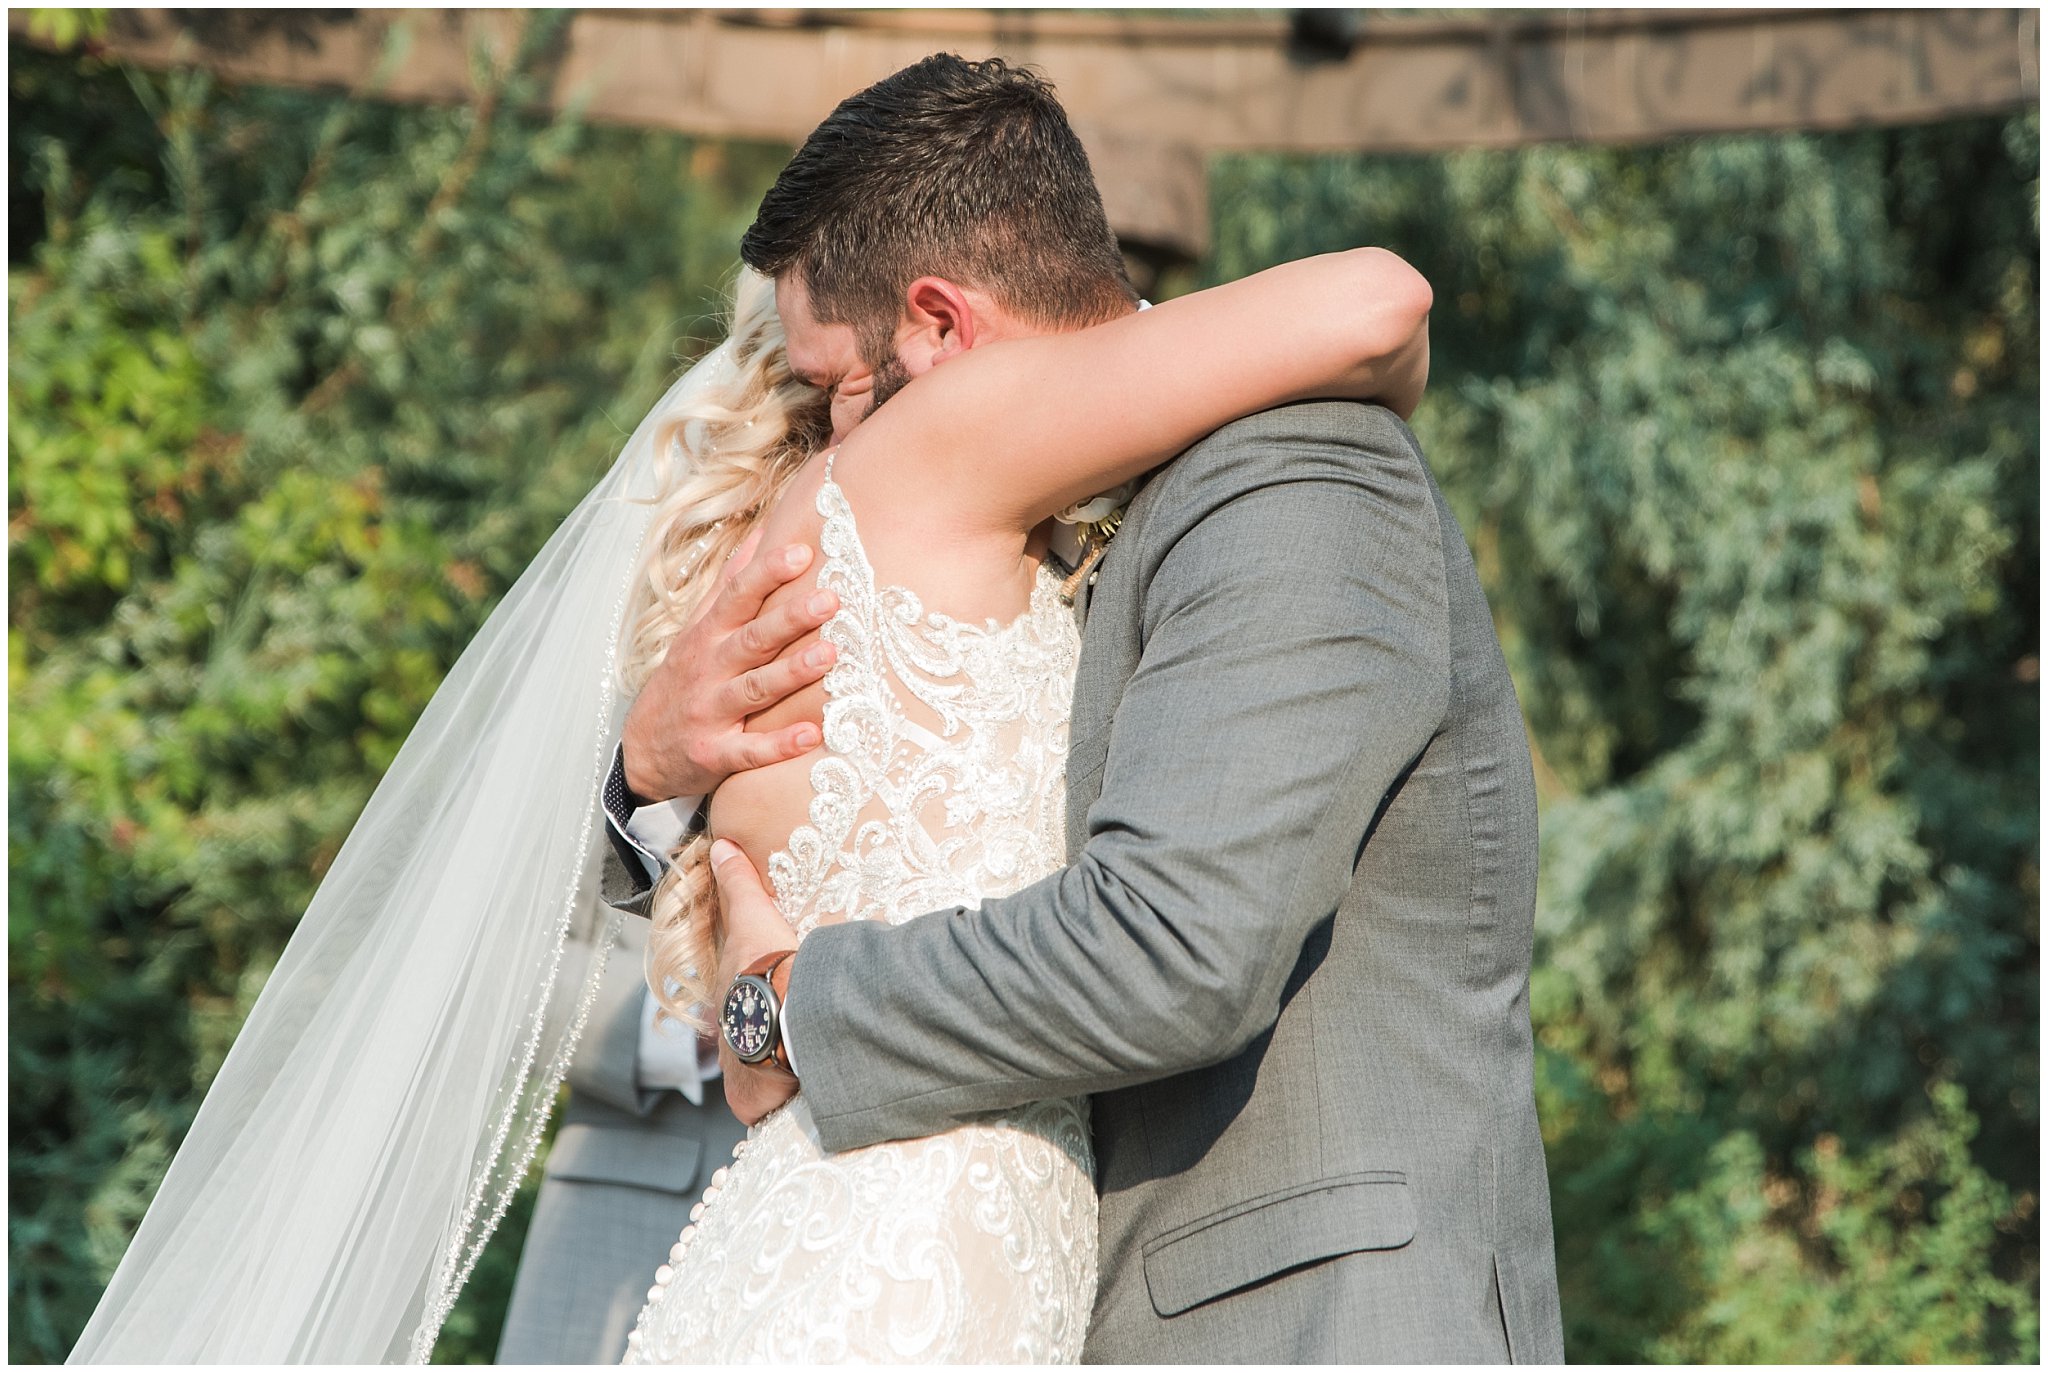 Hug after first kiss during wedding ceremony | Dusty Blue and Rose Summer Wedding at Oak Hills Utah | Jessie and Dallin Photography